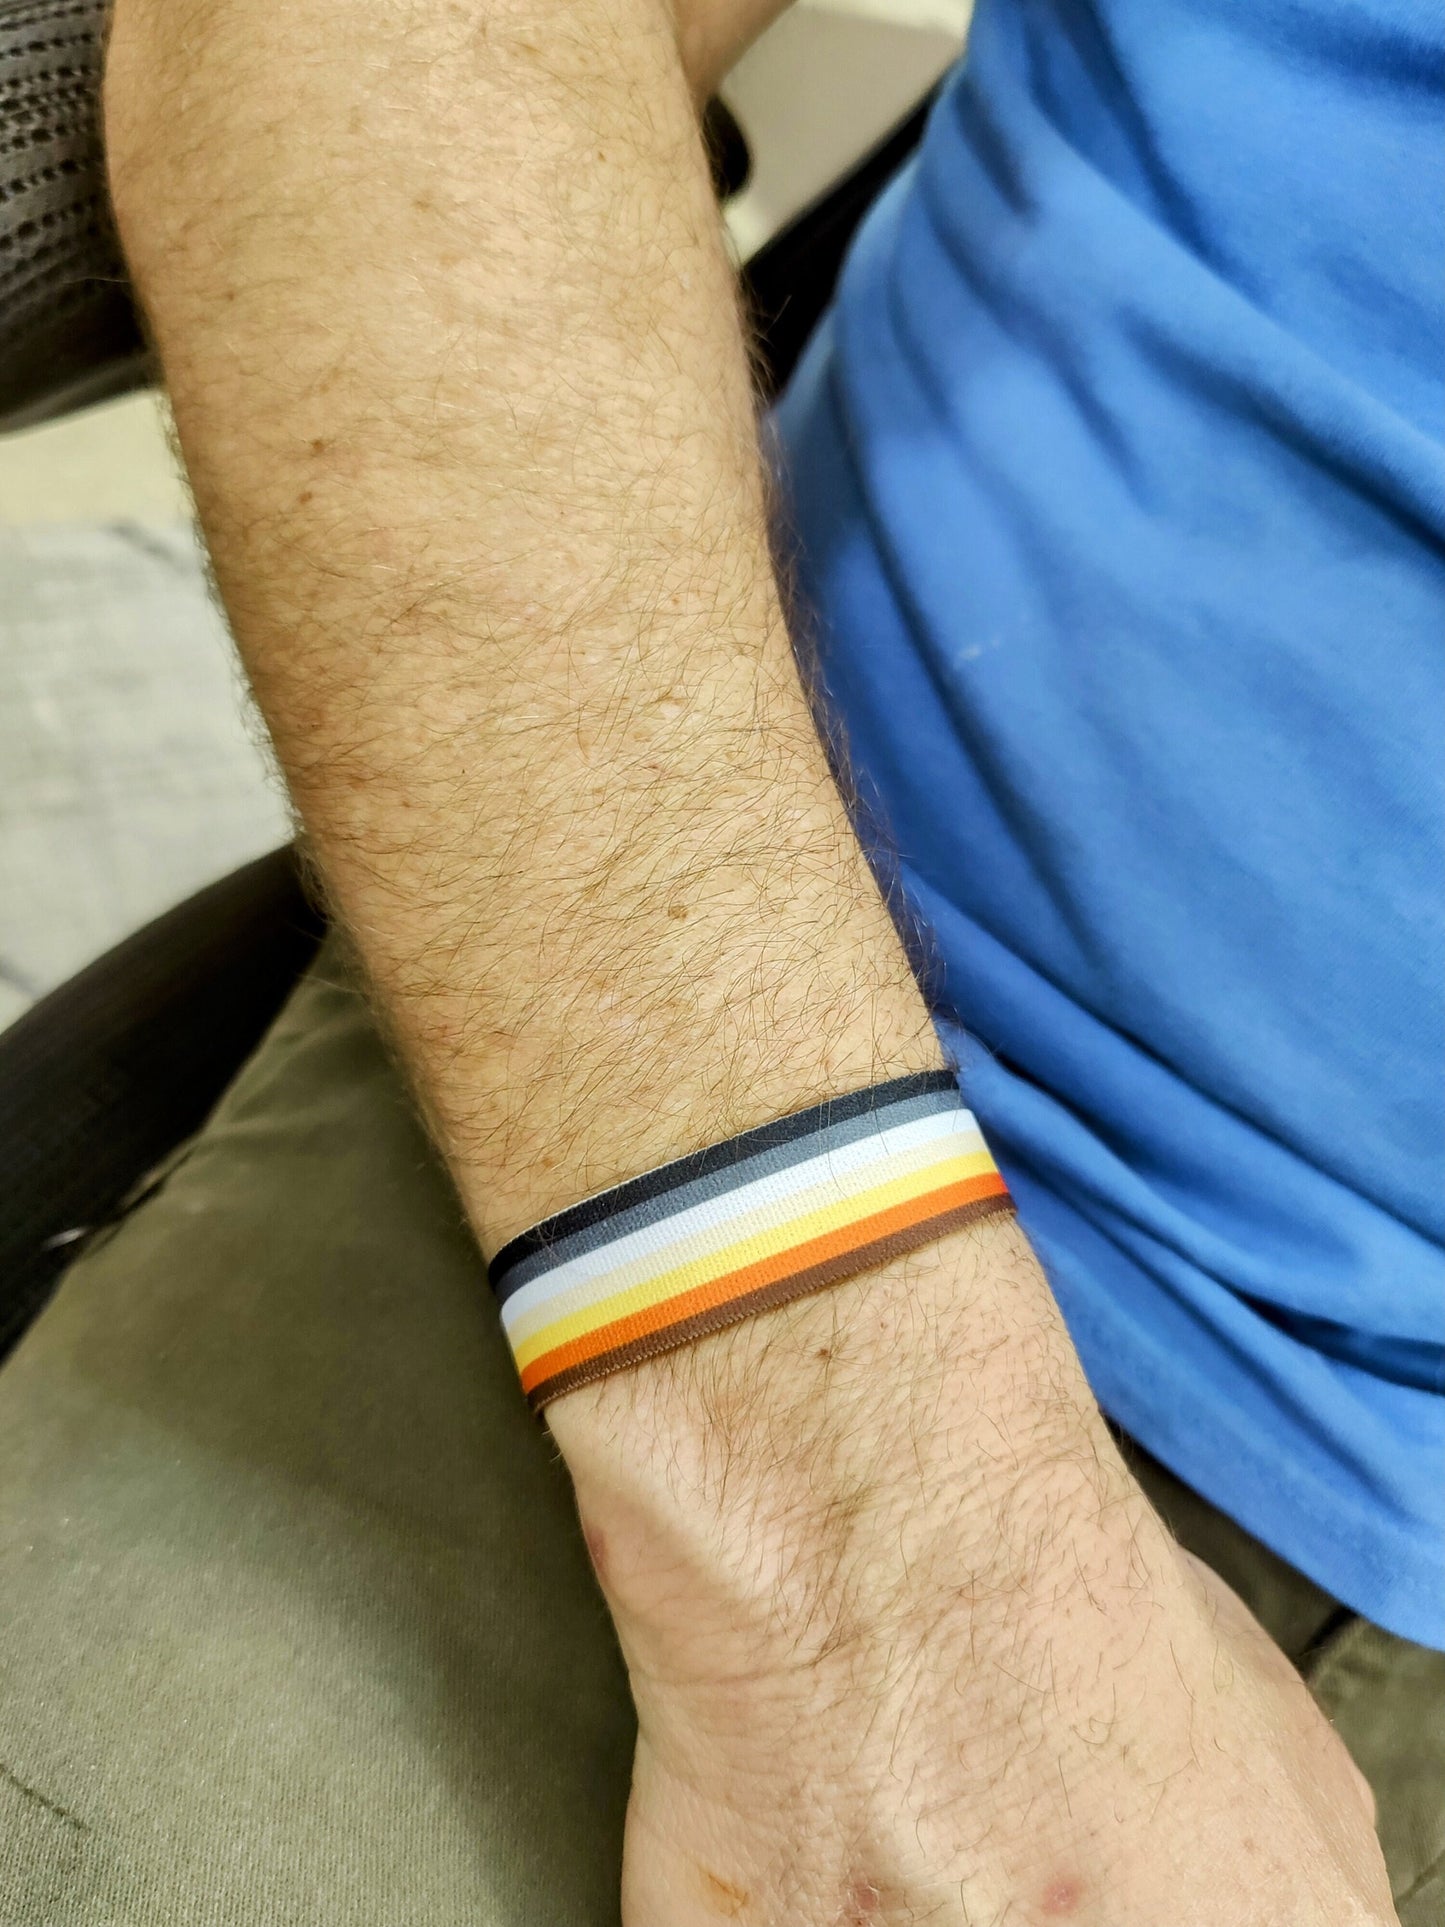 Gay Pride Flag - Thick Elastic Wristband Bracelet - stretchy elastic magnetic clasp - heavy duty, design does not fade, washable 7/8"